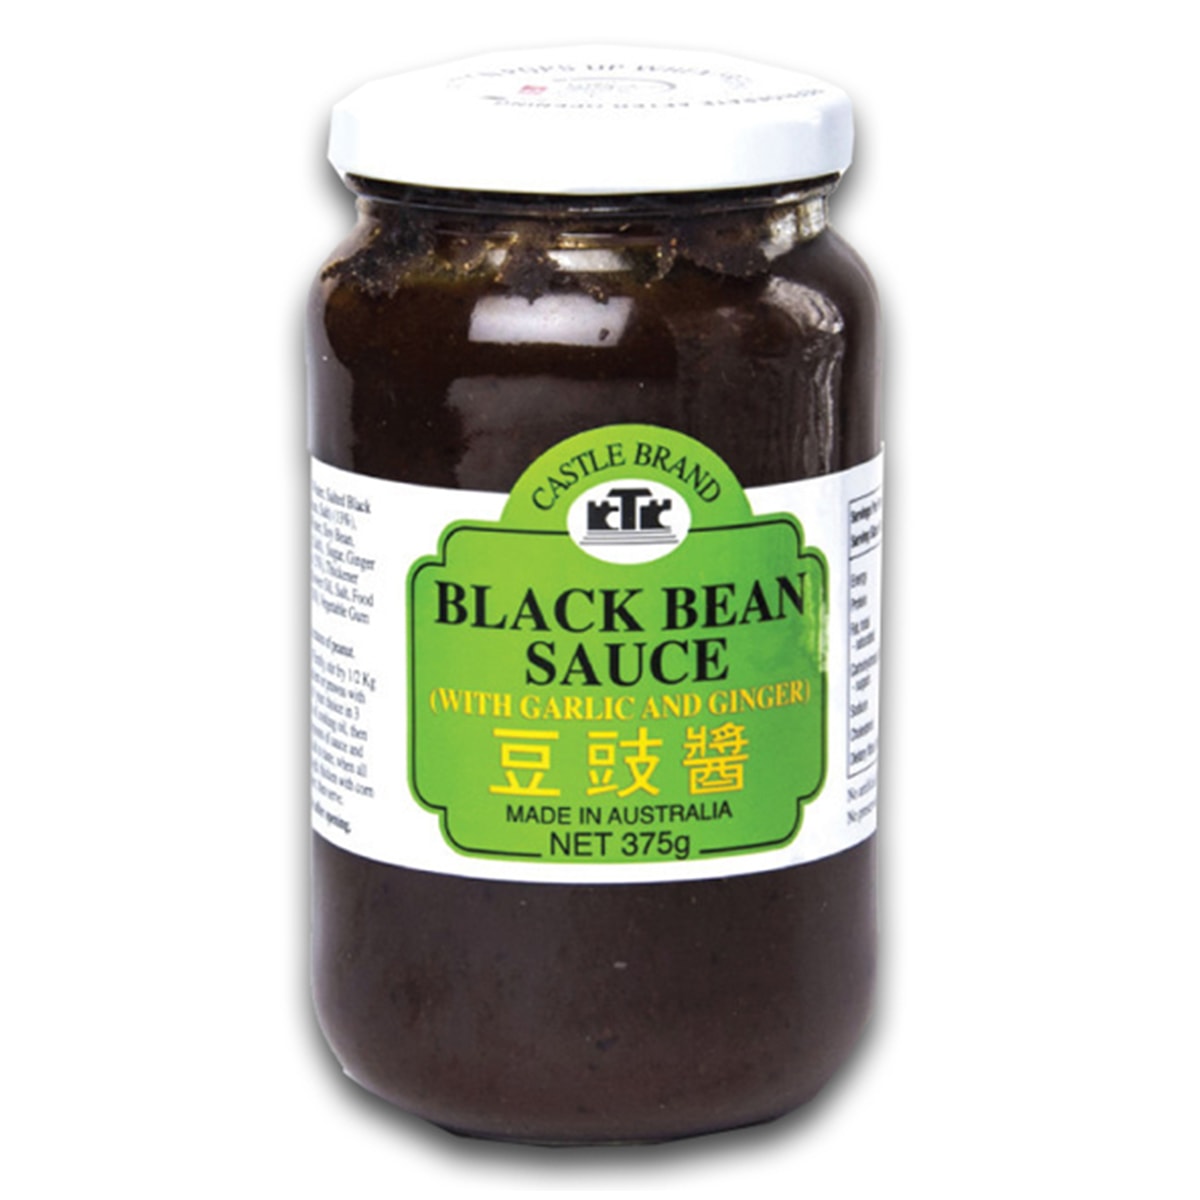 Buy Castle Brand Black Bean Sauce with Garlic and Ginger - 375 gm